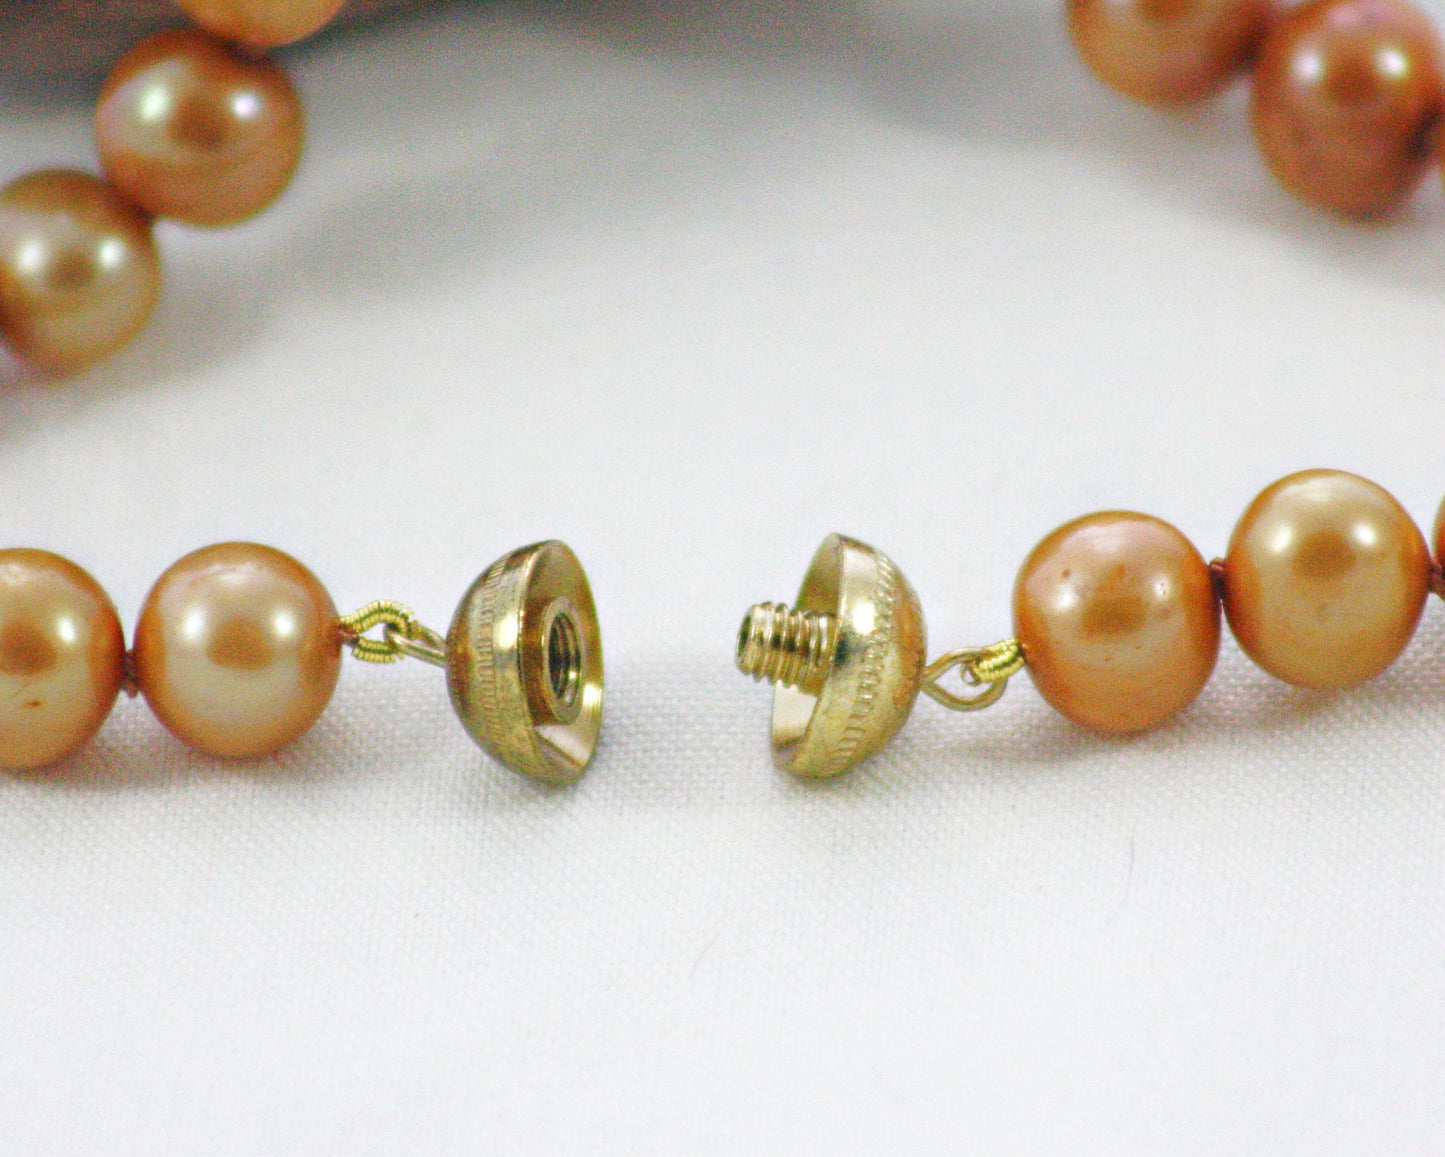 Marmalade Gold Pearl Necklace